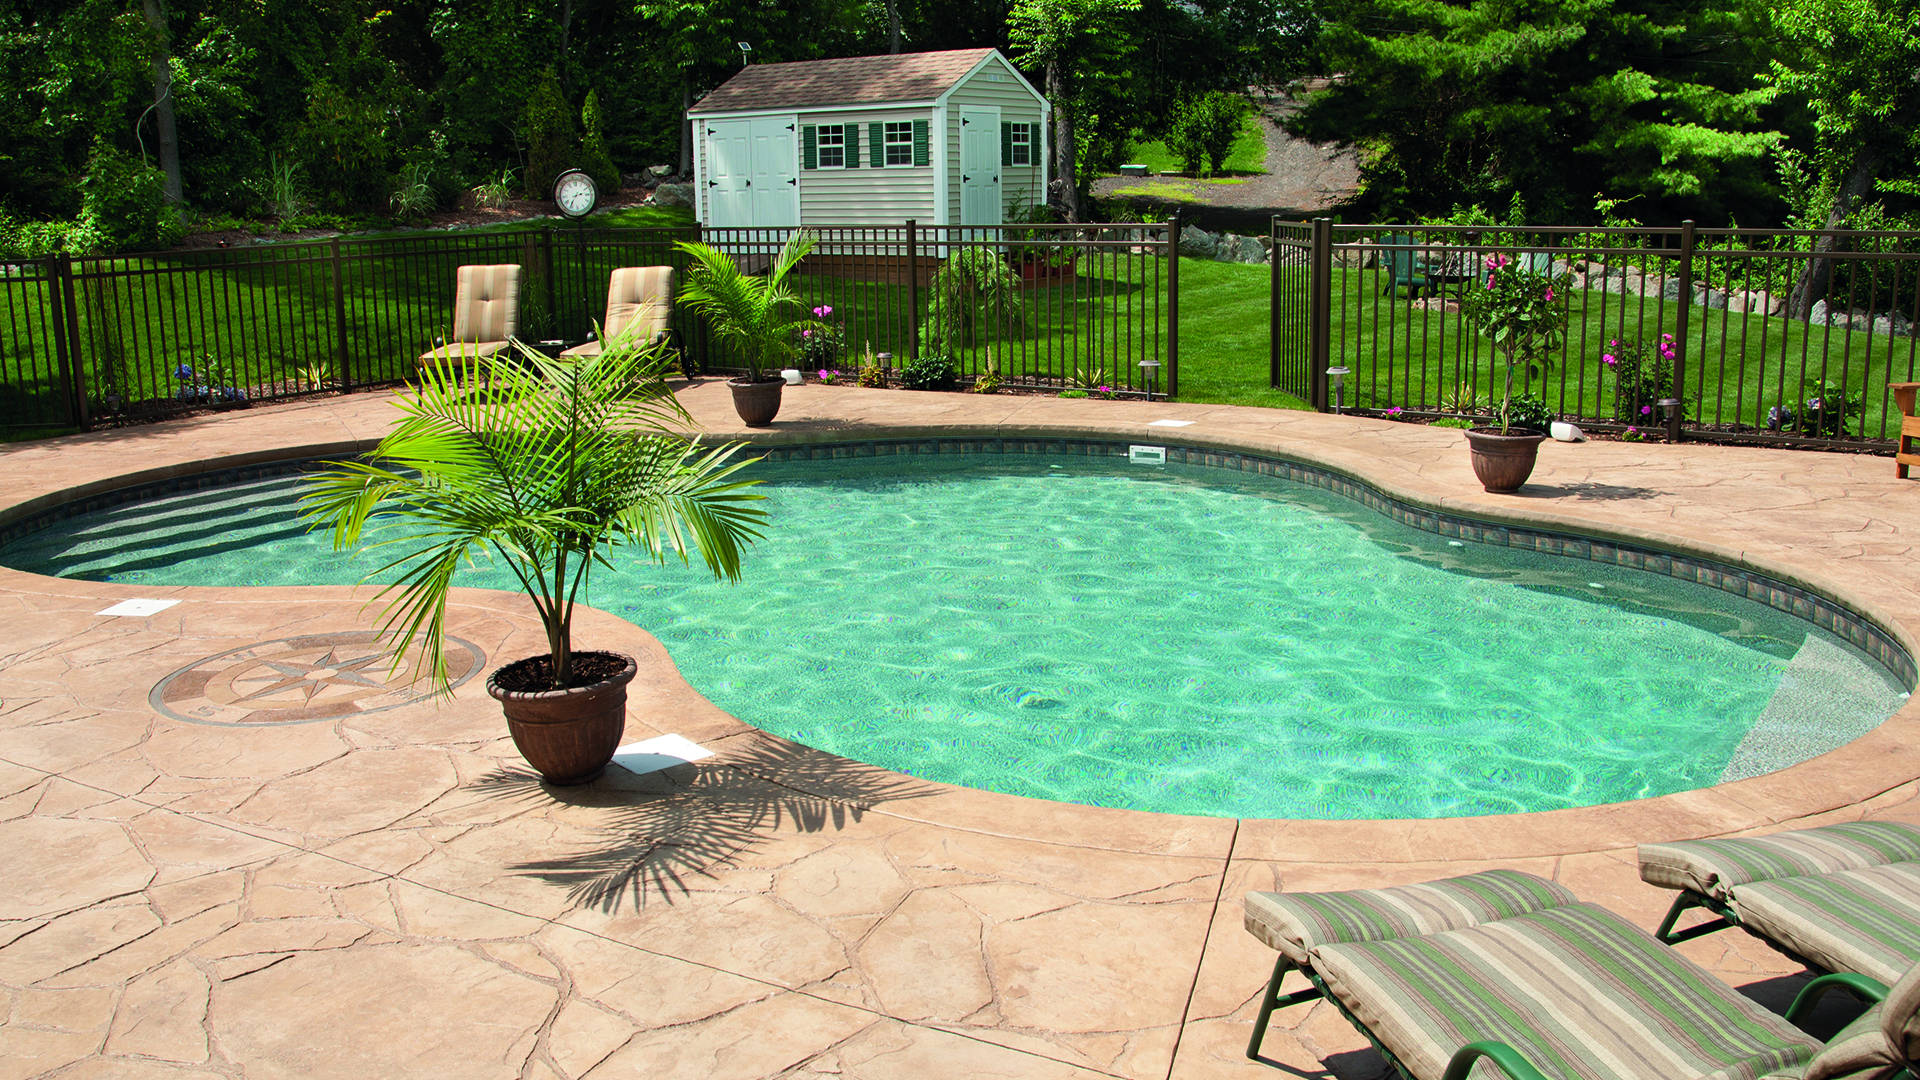 imprinted concrete pool with garden area